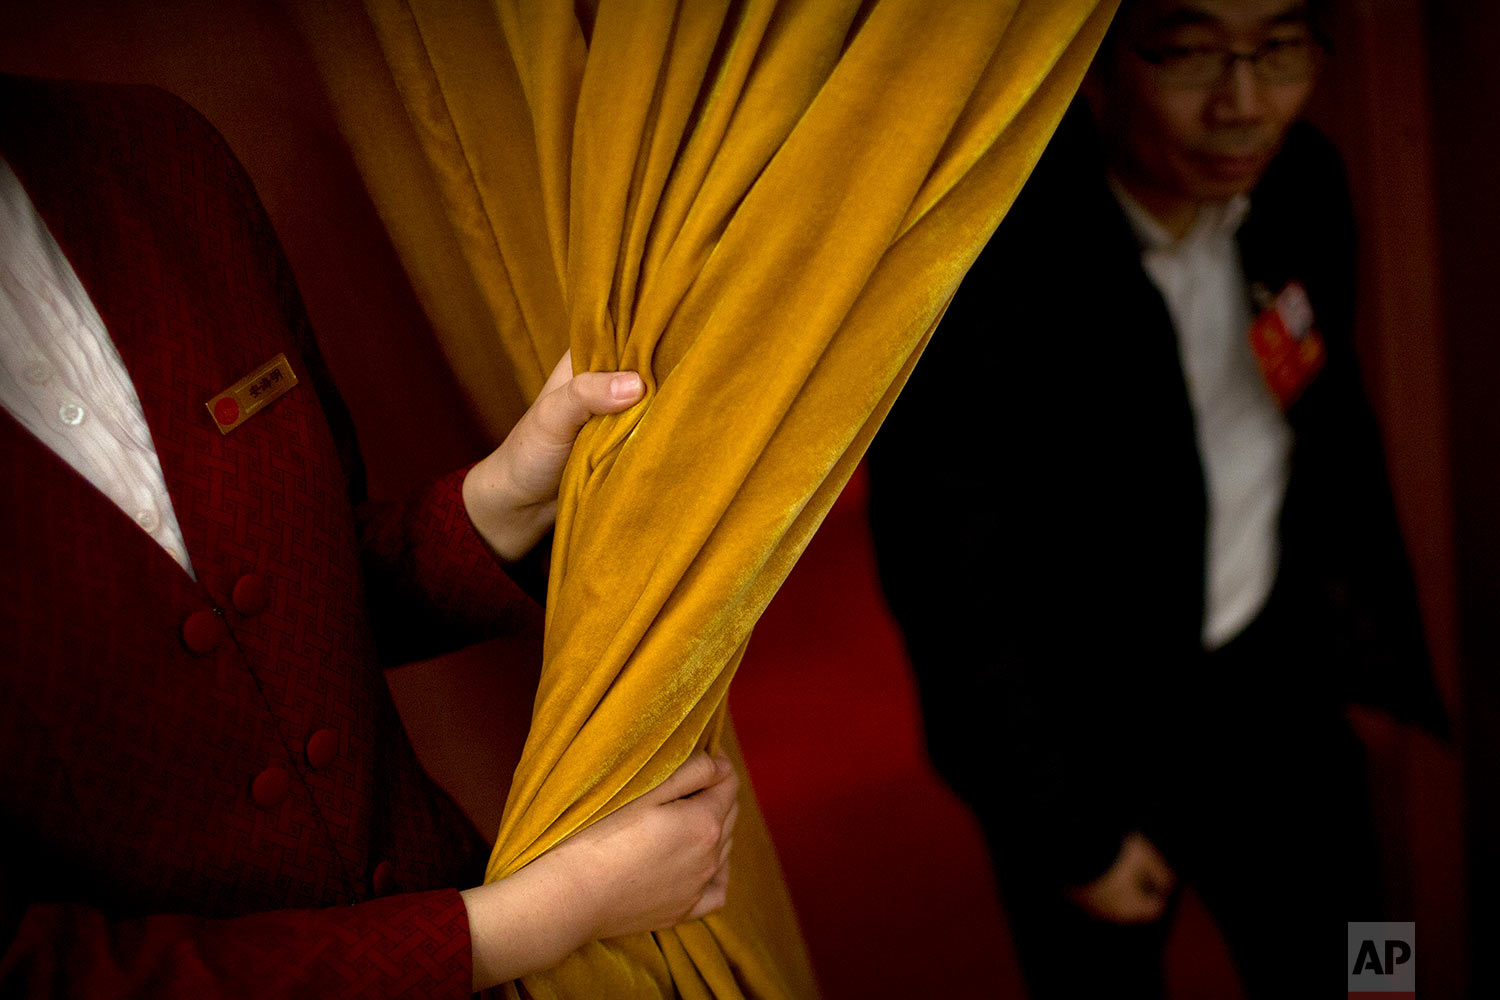  In this Friday, March 9, 2018 photo, an attendant pulls back a curtain for a delegate during a plenary session of China's National People's Congress (NPC) at the Great Hall of the People in Beijing. (AP Photo/Mark Schiefelbein) 